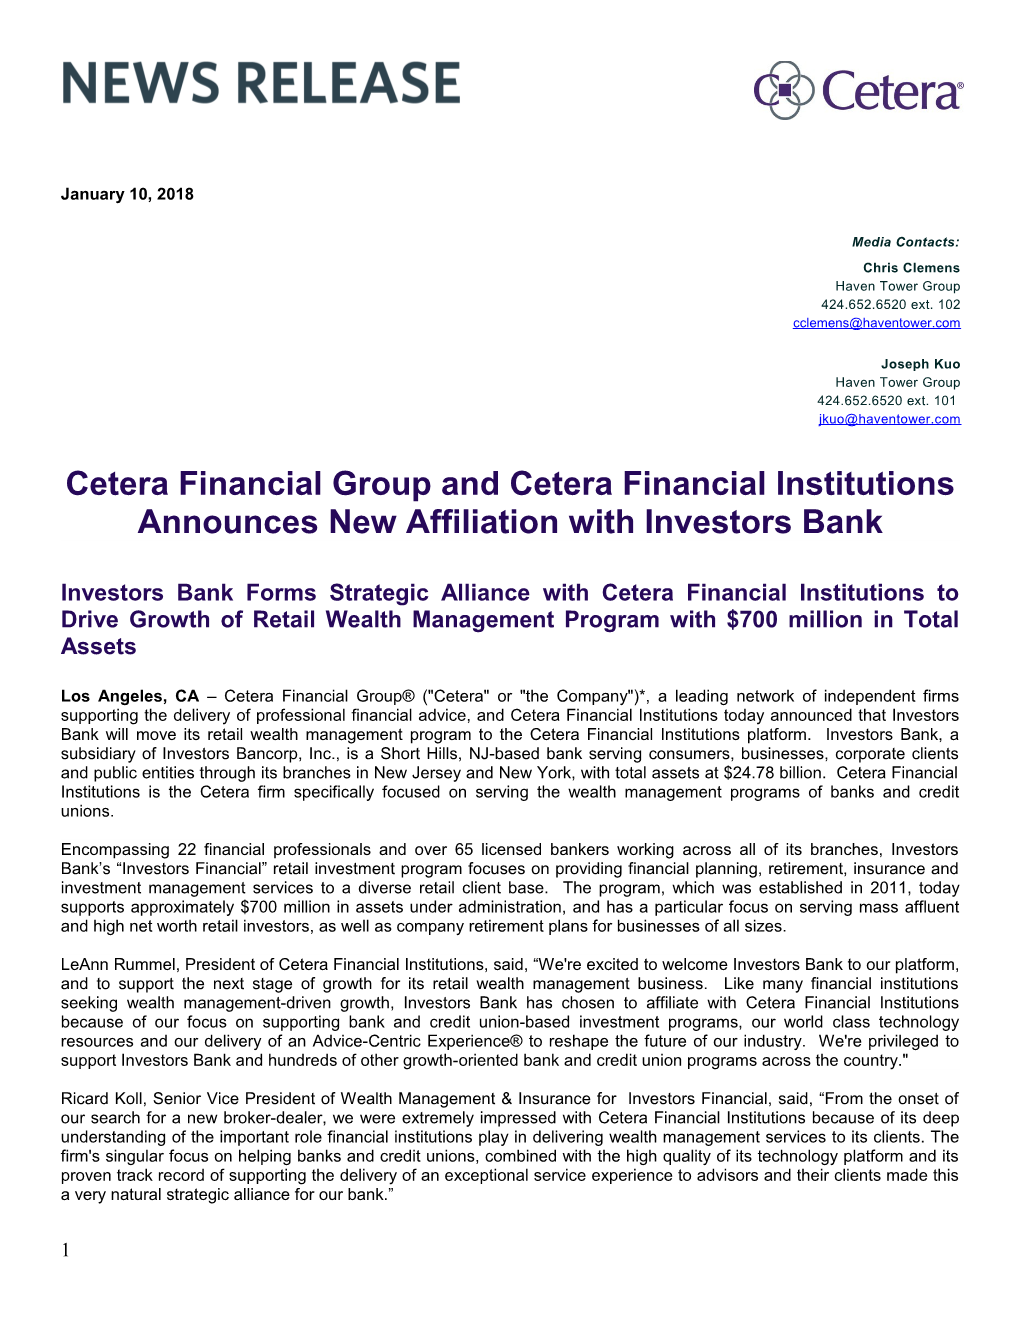 Cetera Financial Group and Cetera Financial Institutions Announces New Affiliationwithinvestors